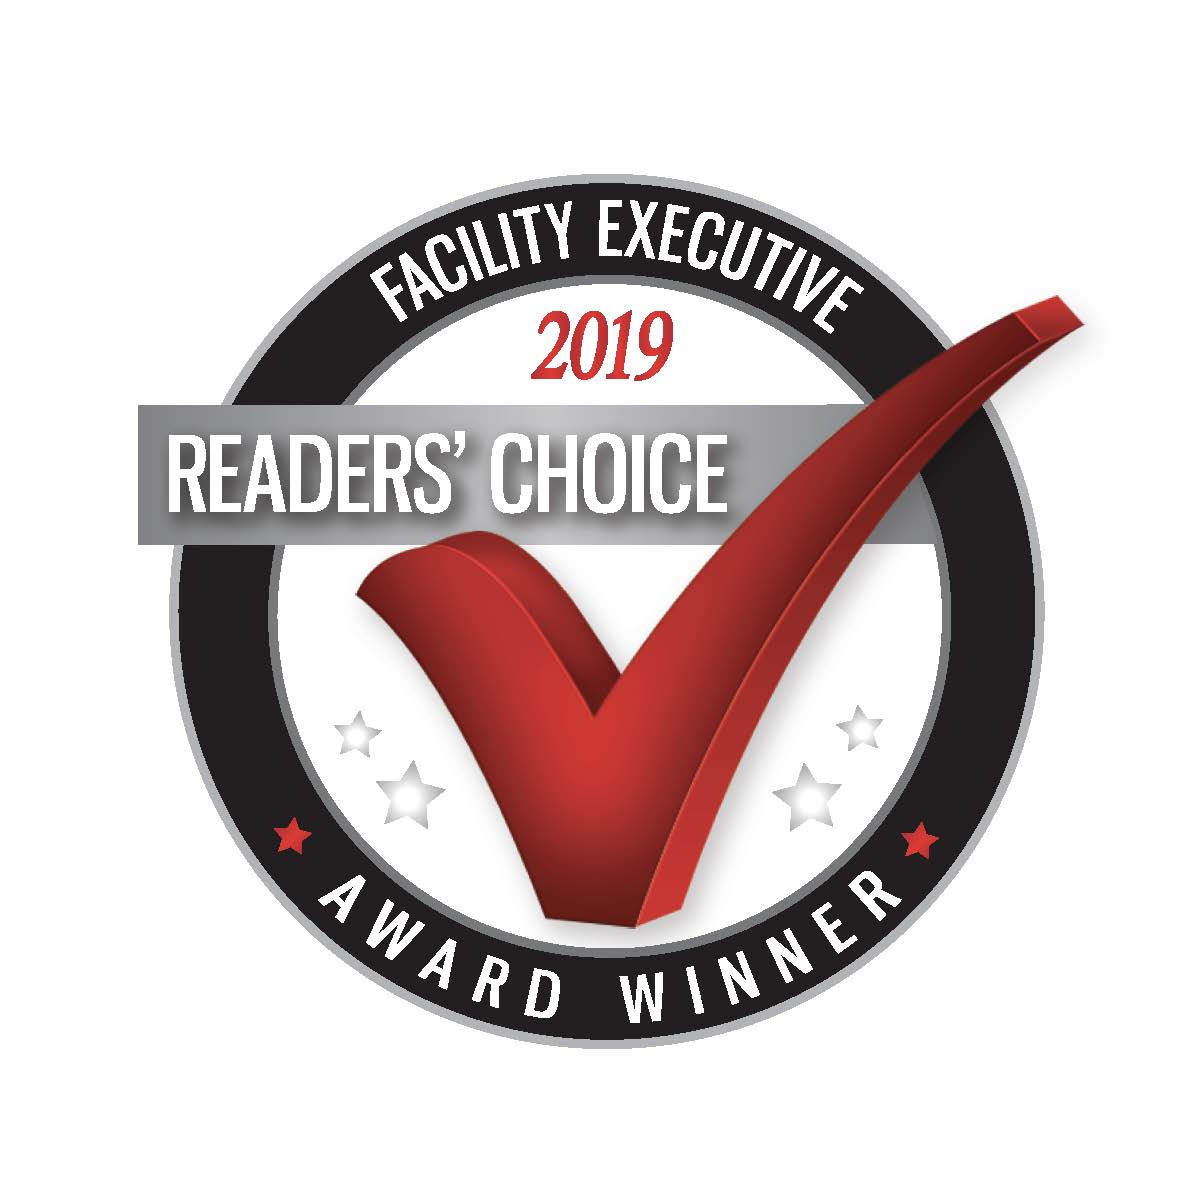 ARC Facilities Voted Best Software By Facility Executives Two Years in a Row